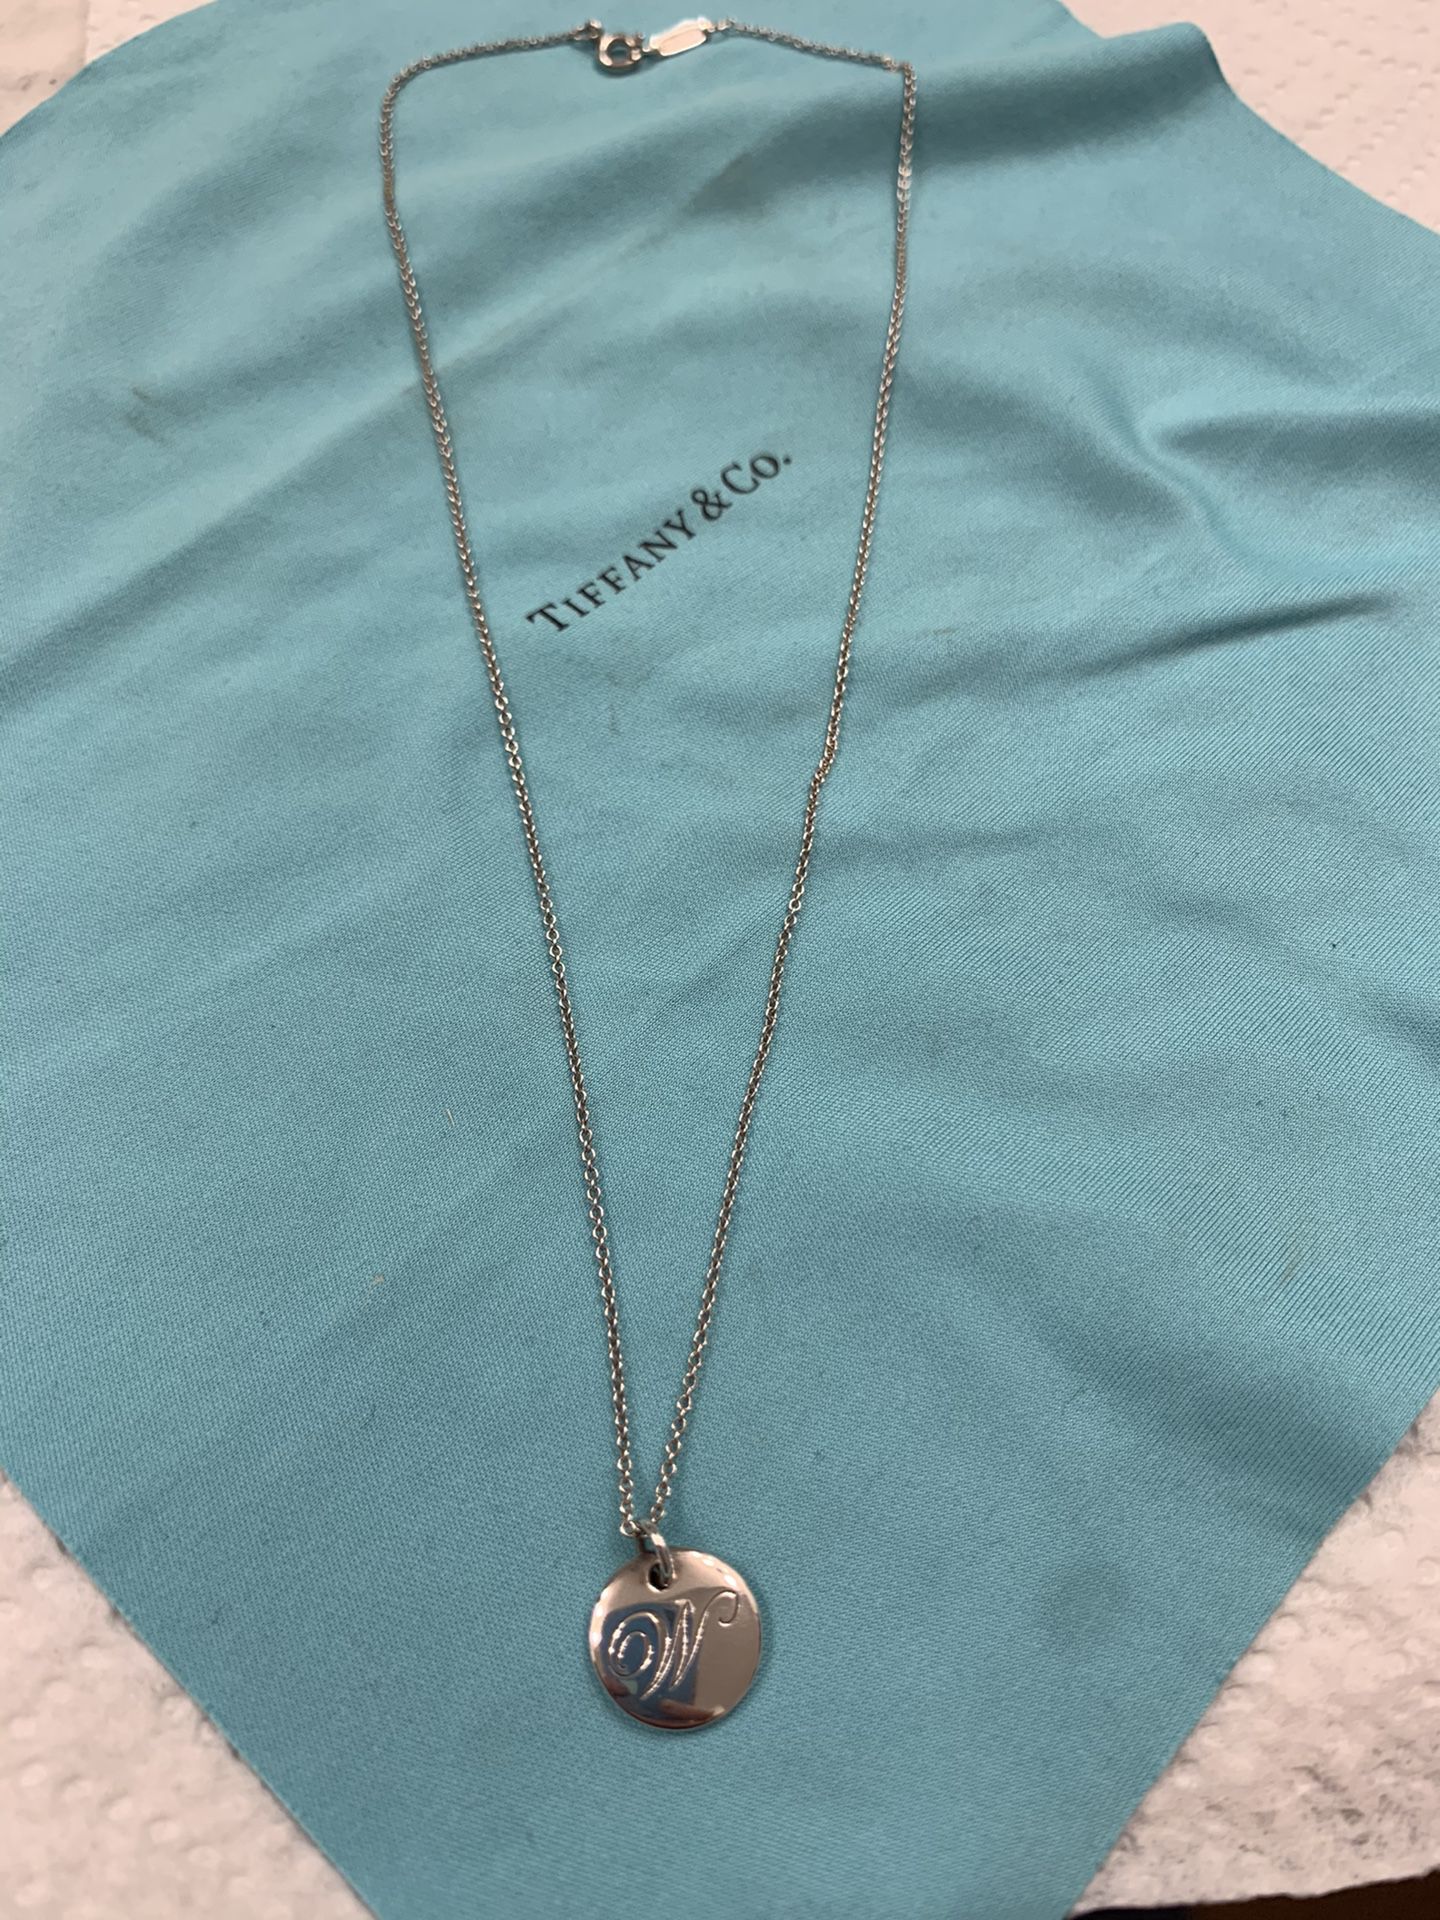 Tiffany and Co sterling silver necklace w/W initial pendant